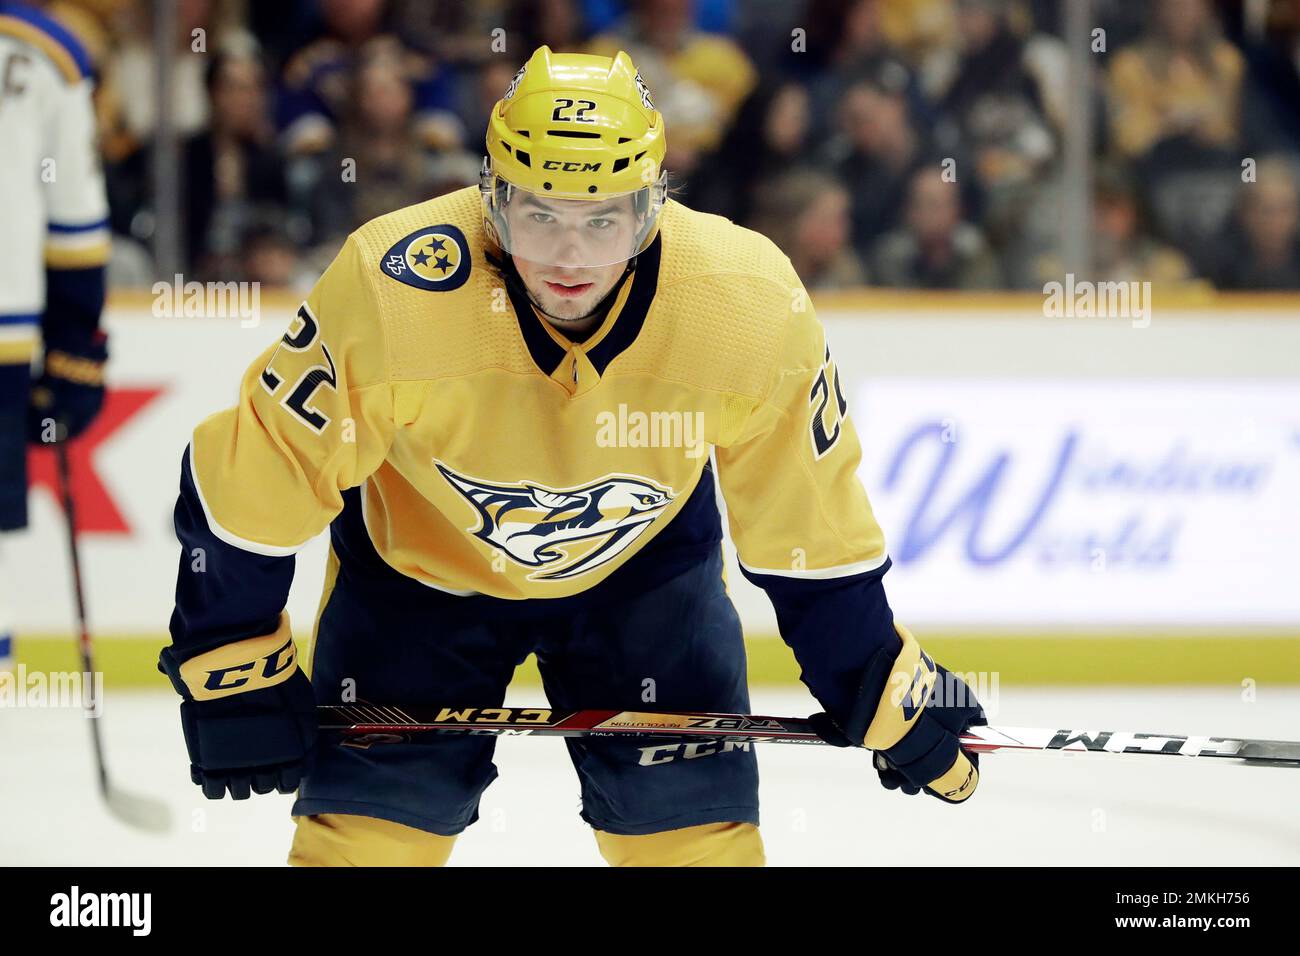 Download Ice Hockey Rink Kevin Fiala Wallpaper